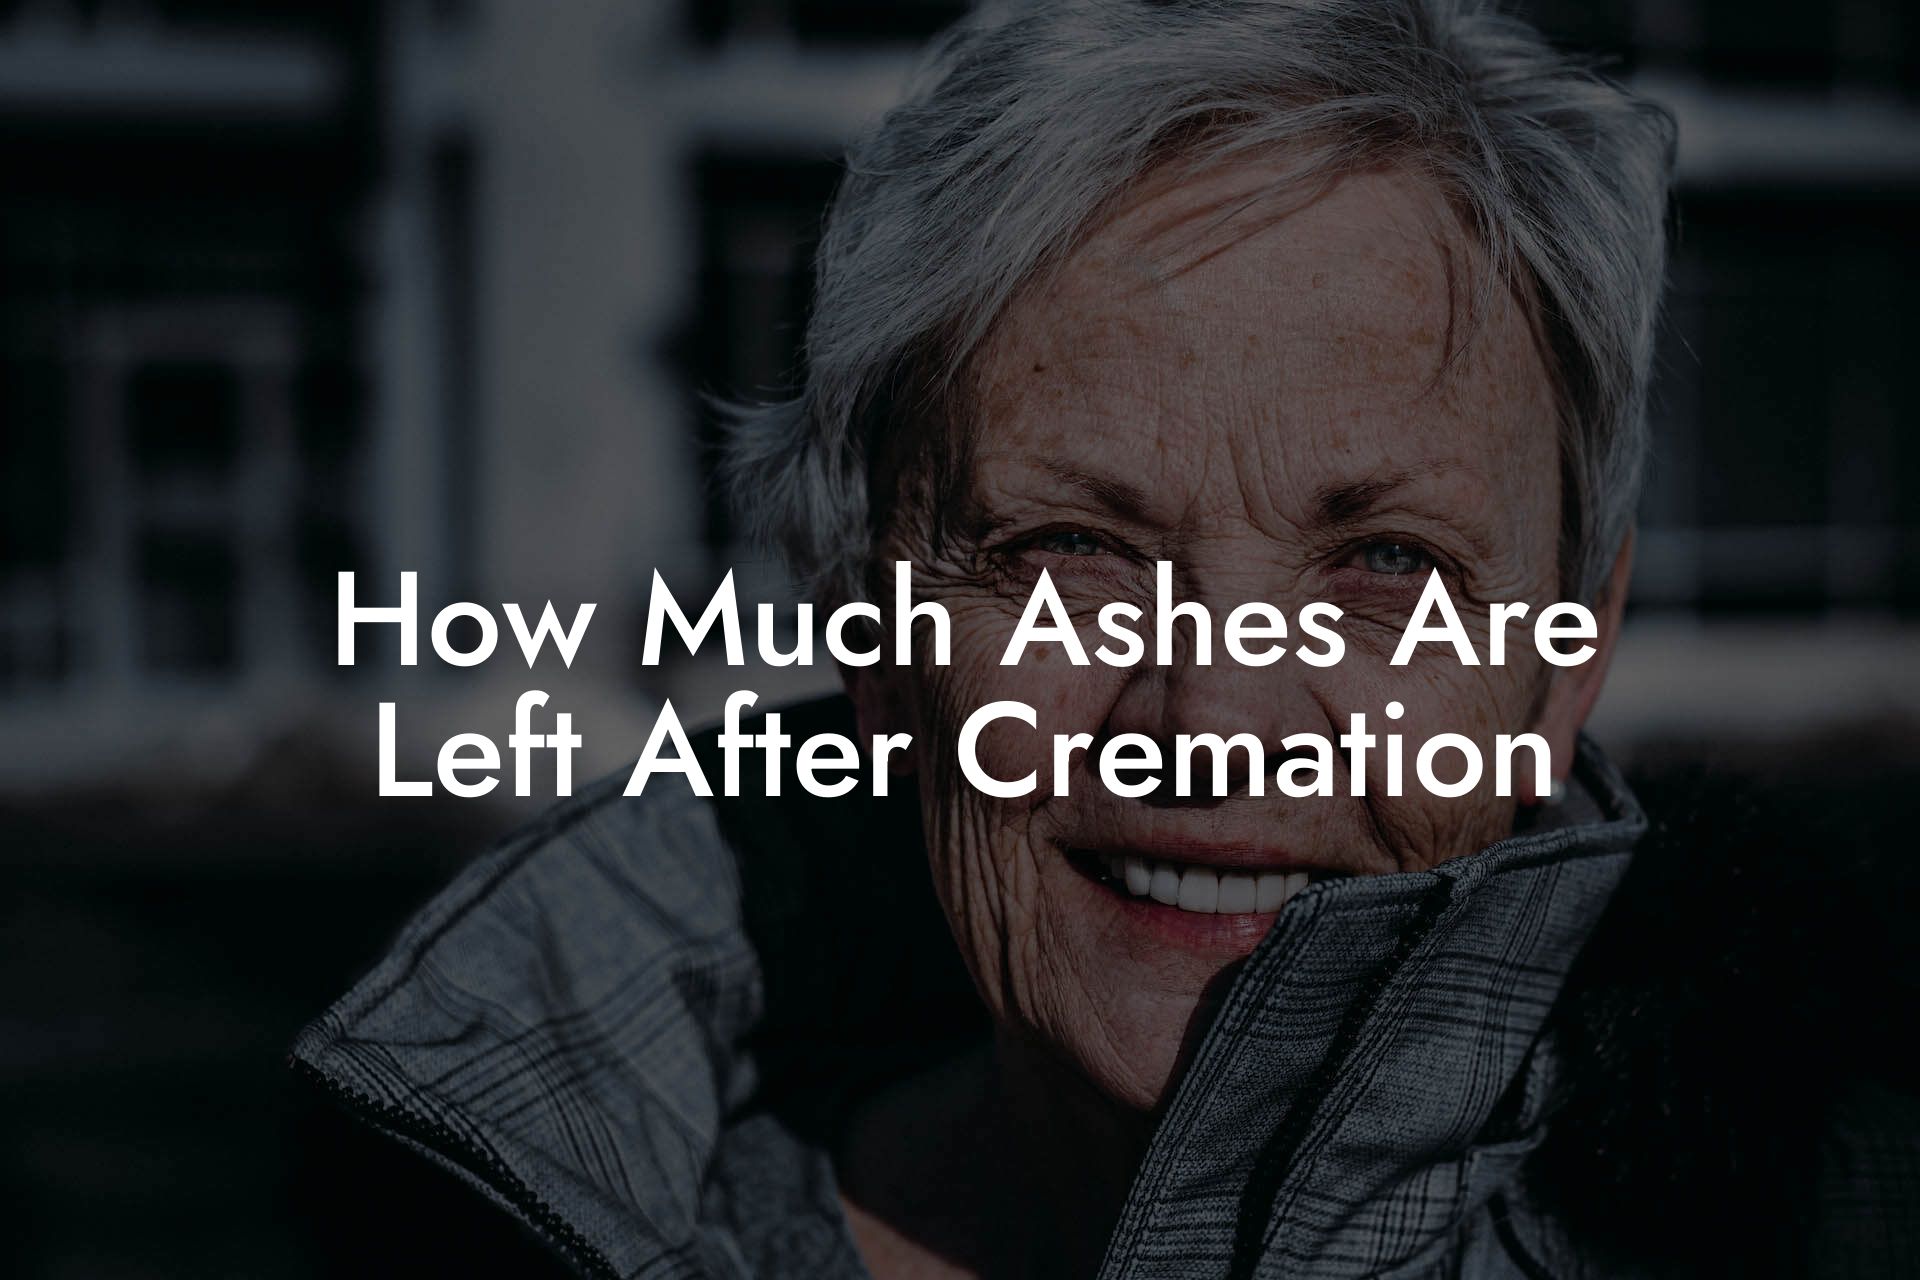 How Much Ashes Are Left After Cremation